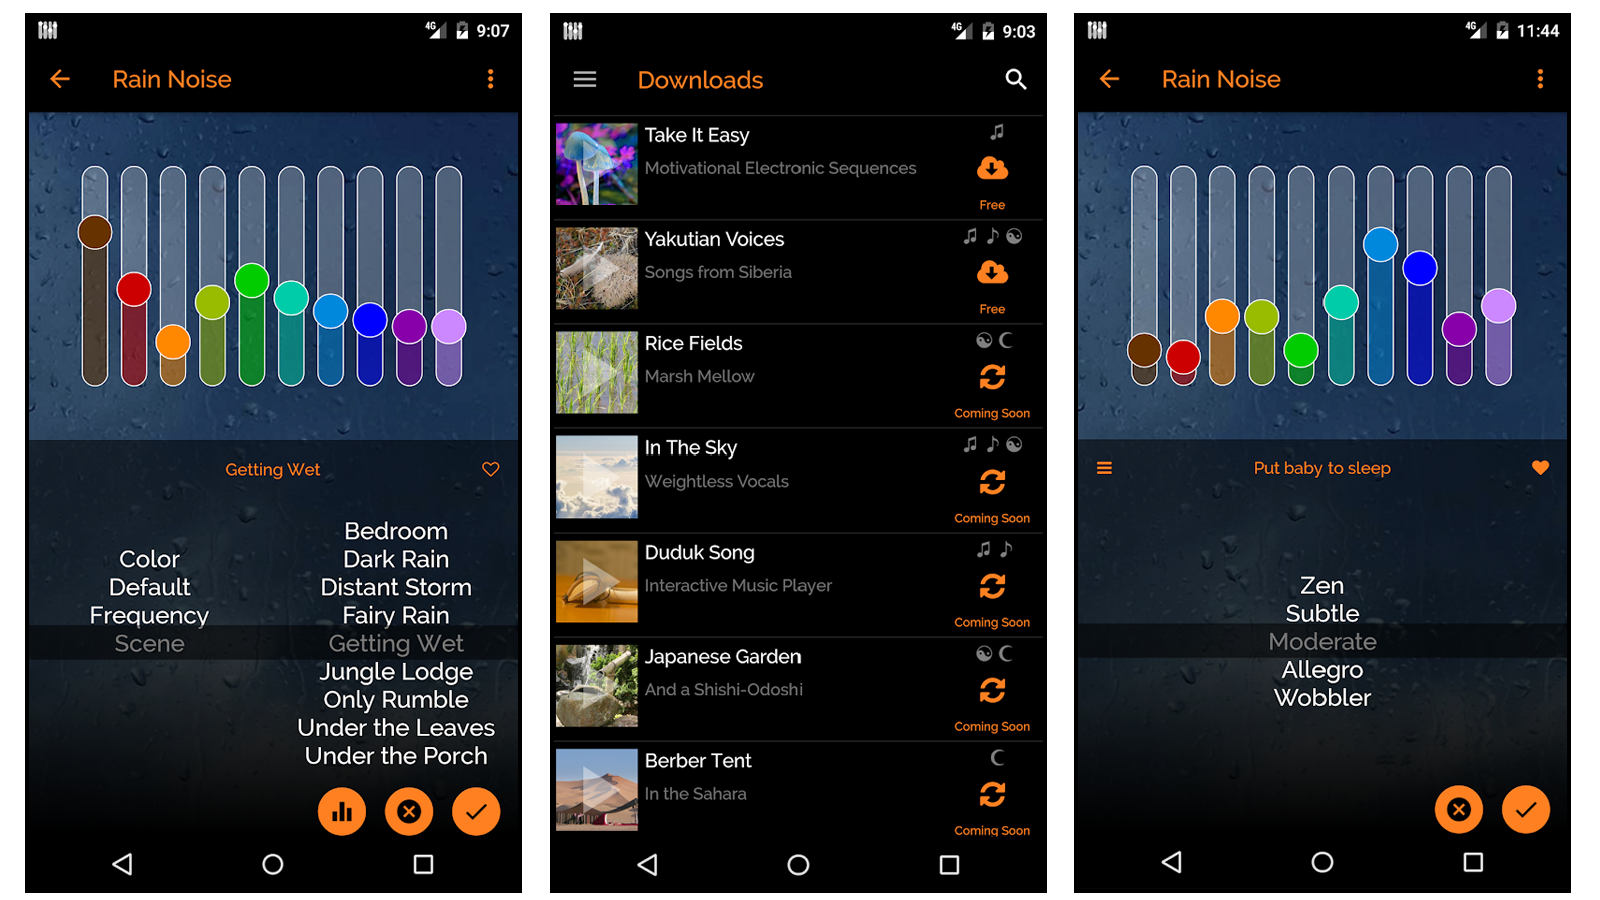 Customizing ambient noise in the myNoise app.